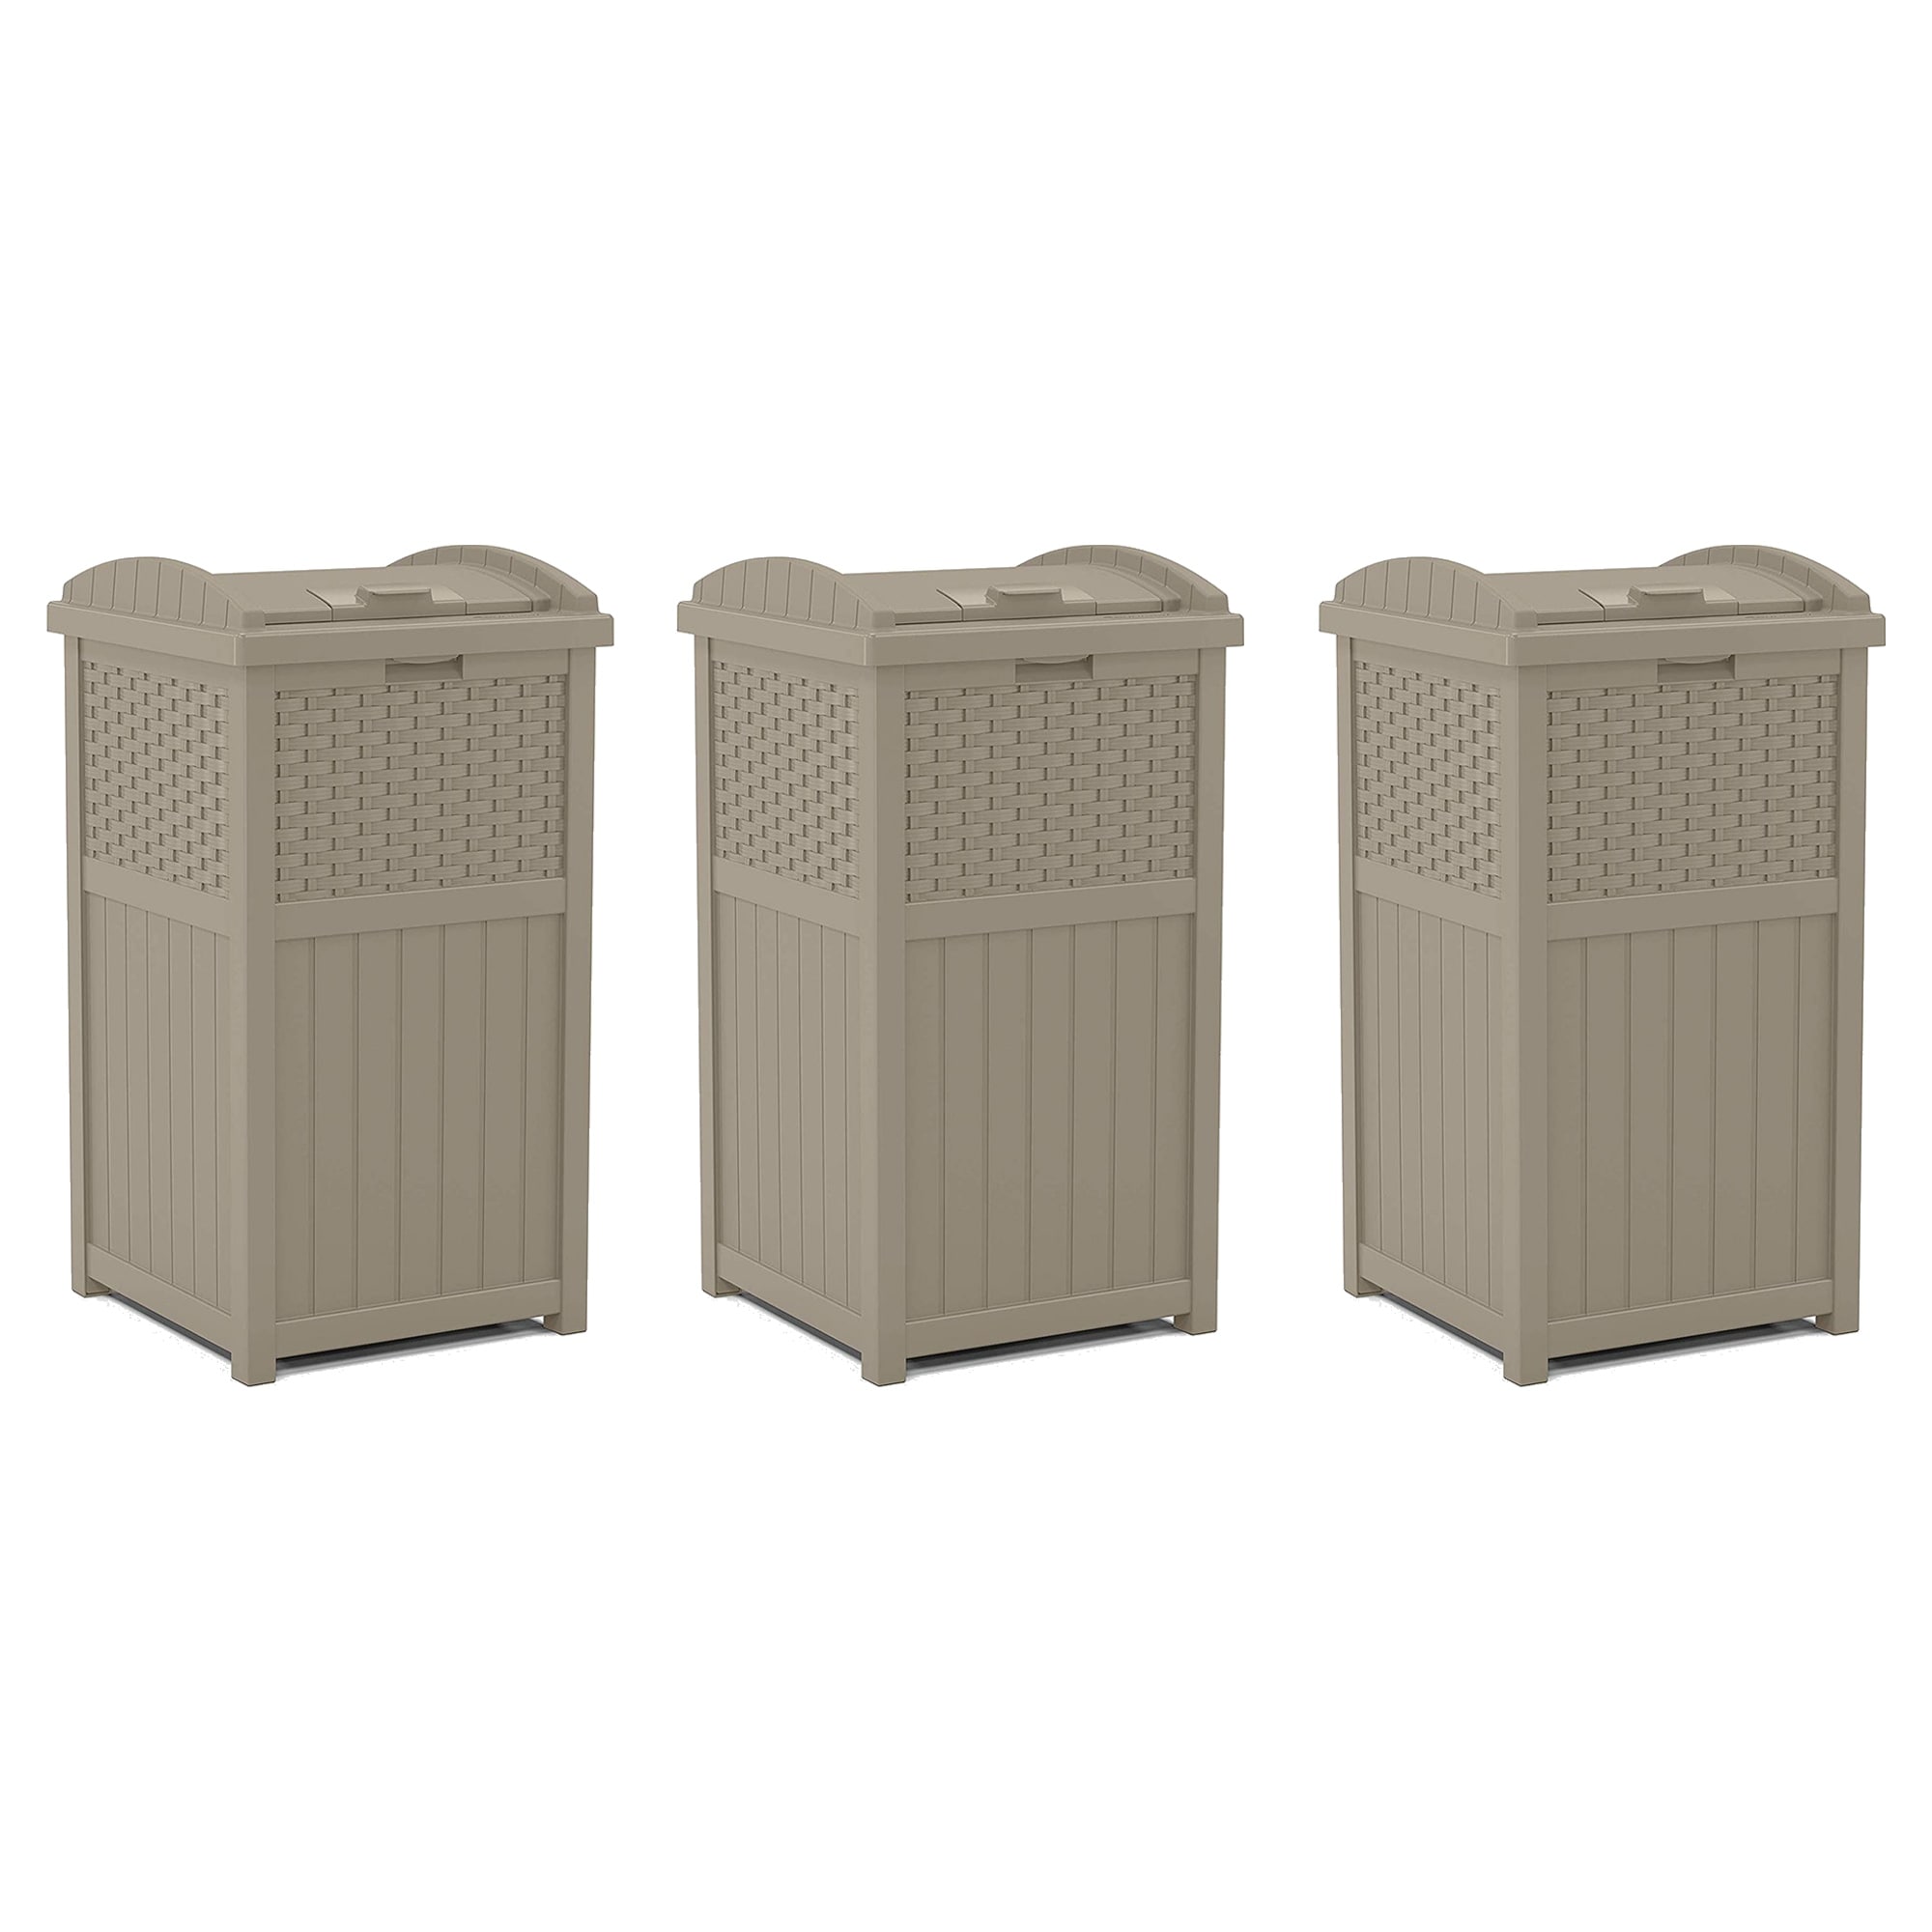 https://ak1.ostkcdn.com/images/products/is/images/direct/ed46ab35fe6ebbd78700cef841f038adaa4e43f1/Suncast-Wicker-Plastic-Hideaway-Trash-Can-with-Latching-Lid%2C-Dark-Taupe-%283-Pack%29.jpg